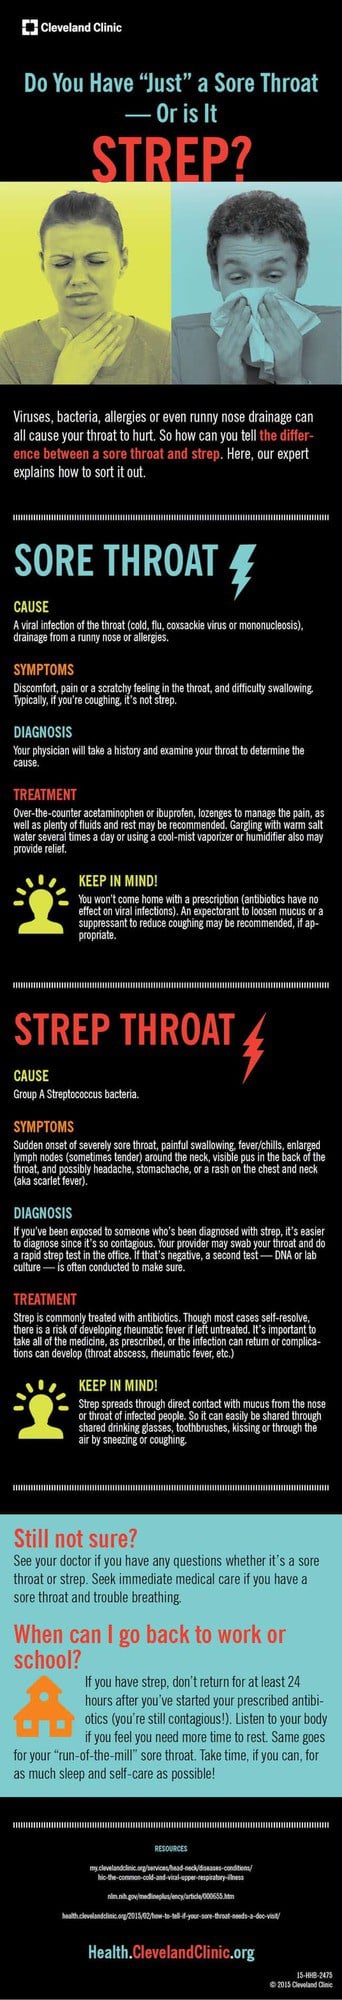 Sore throat or strep from the Cleveland Clinic